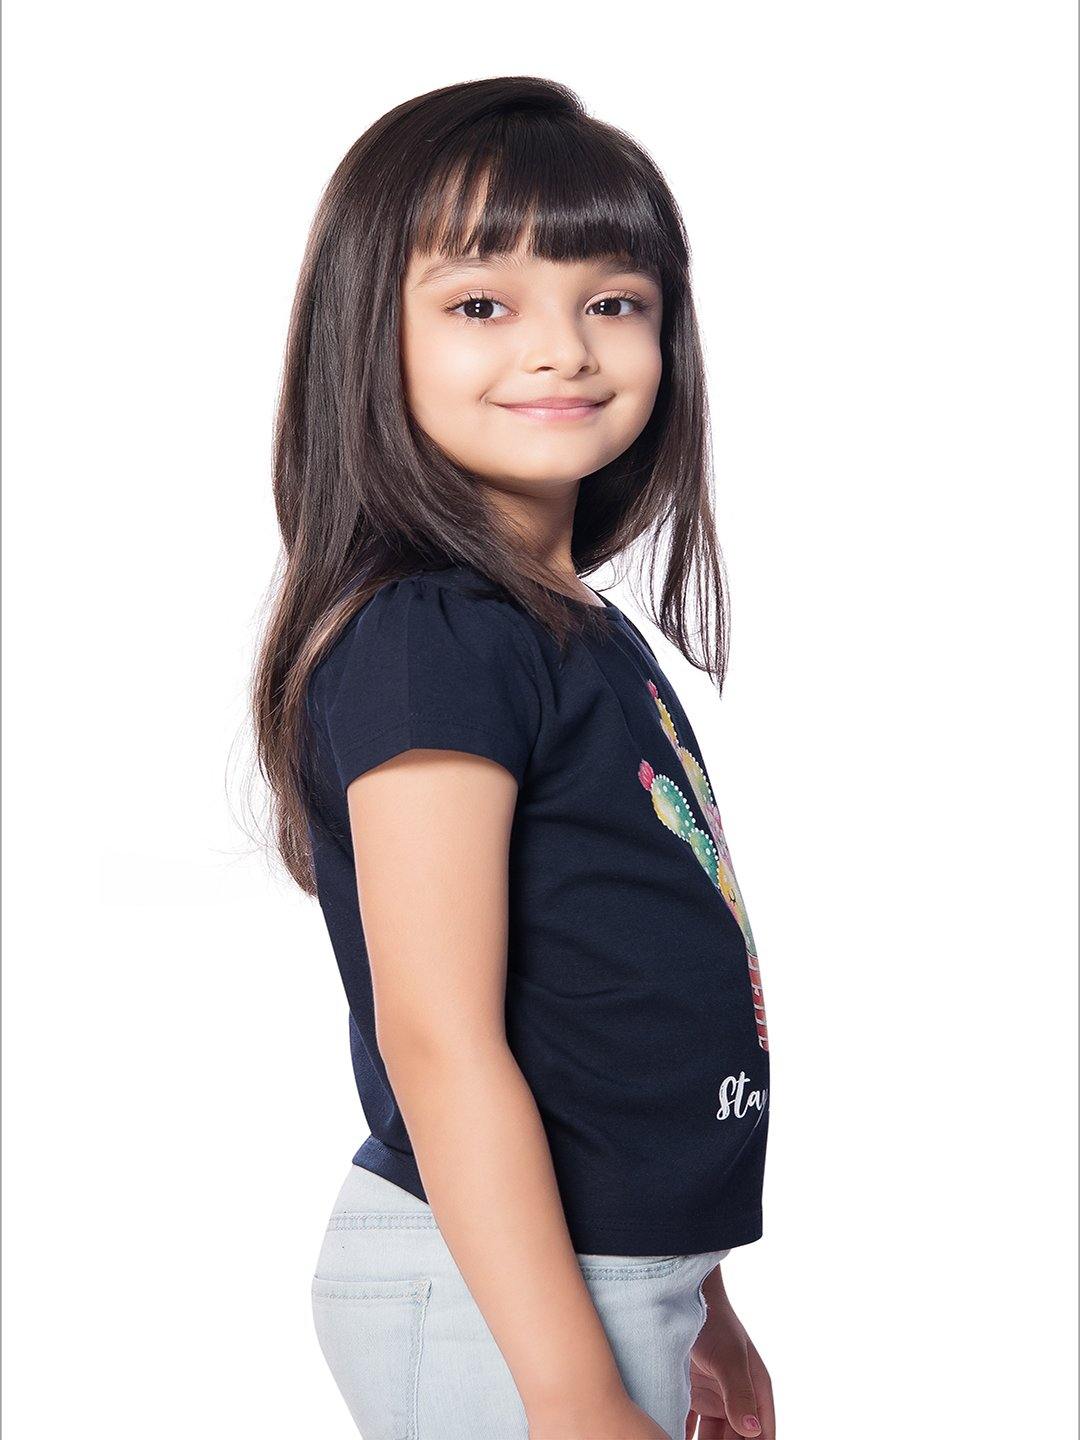 Tiny Baby Navy Blue Colored Top - T-110 Navy Blue - TINY BABY INDIA shop.tinybaby.in